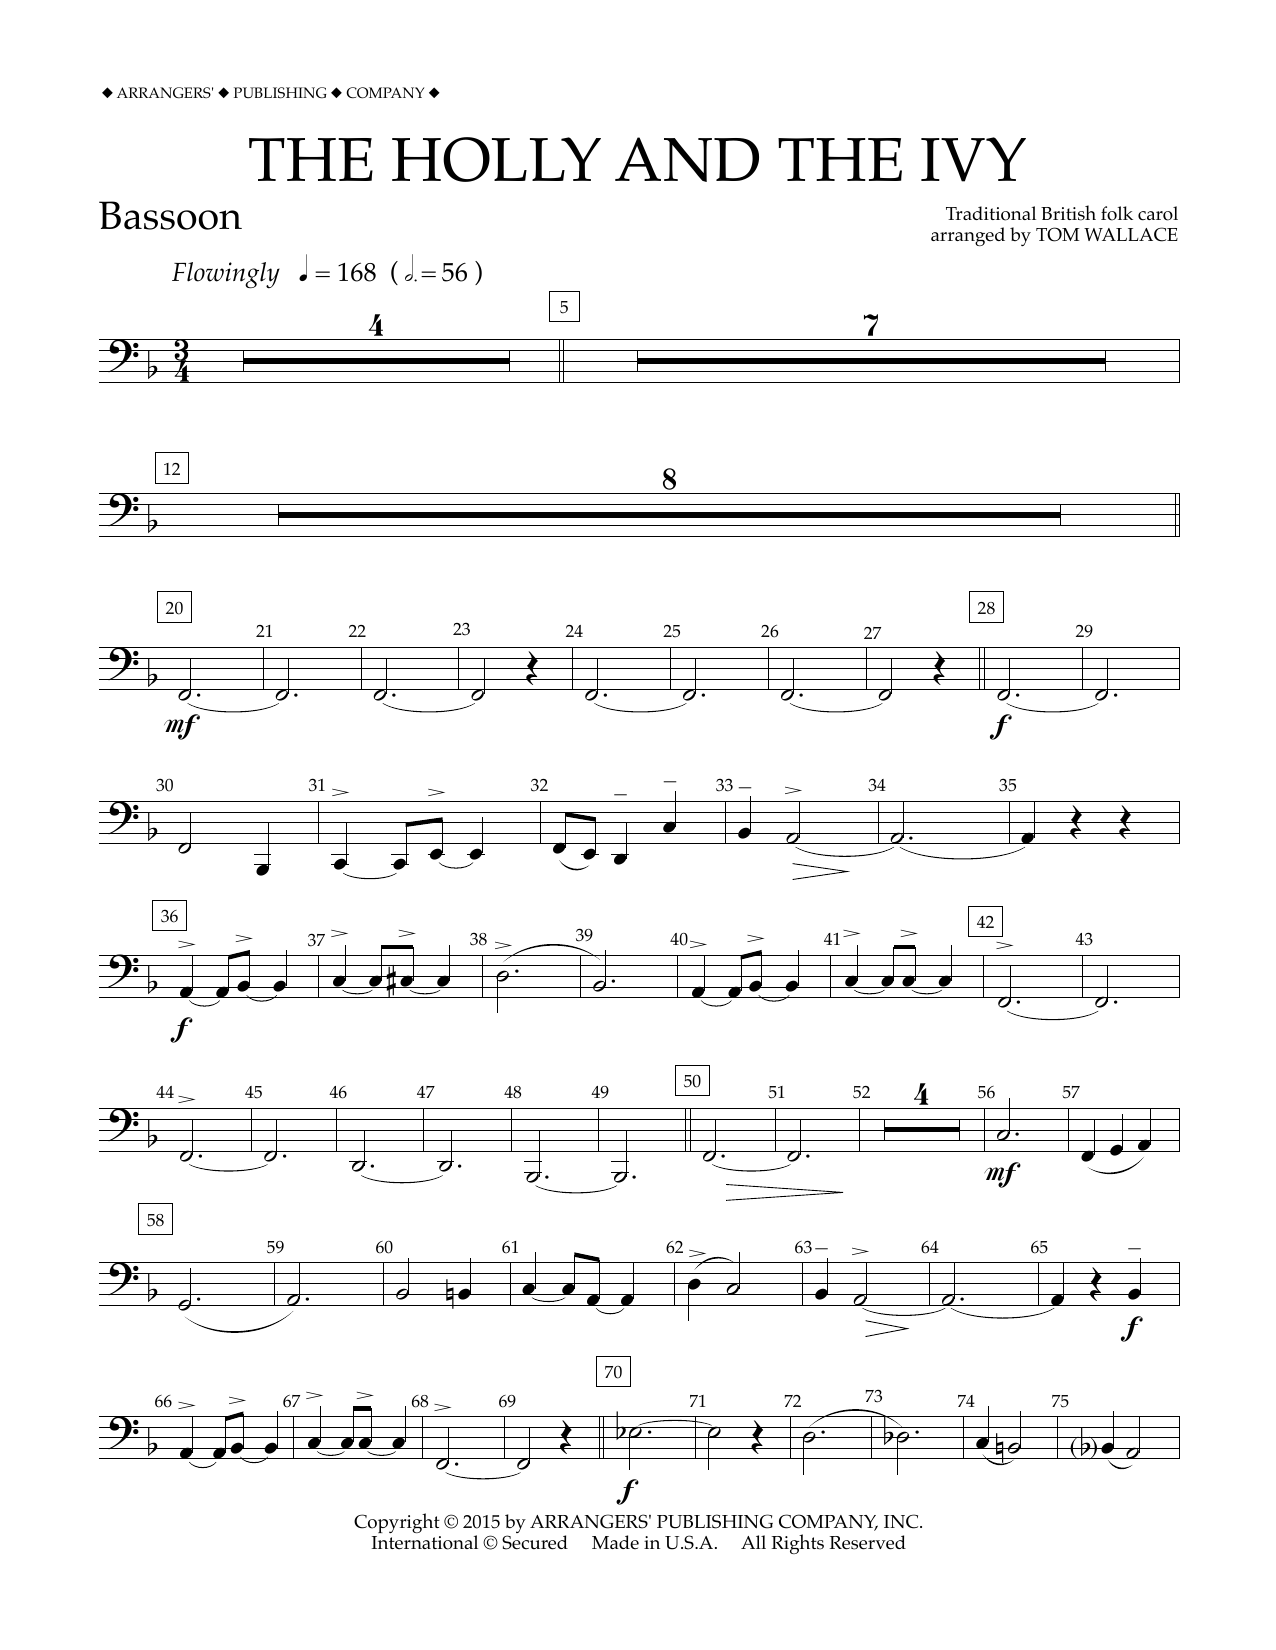 Download Tom Wallace The Holly and the Ivy - Bassoon Sheet Music